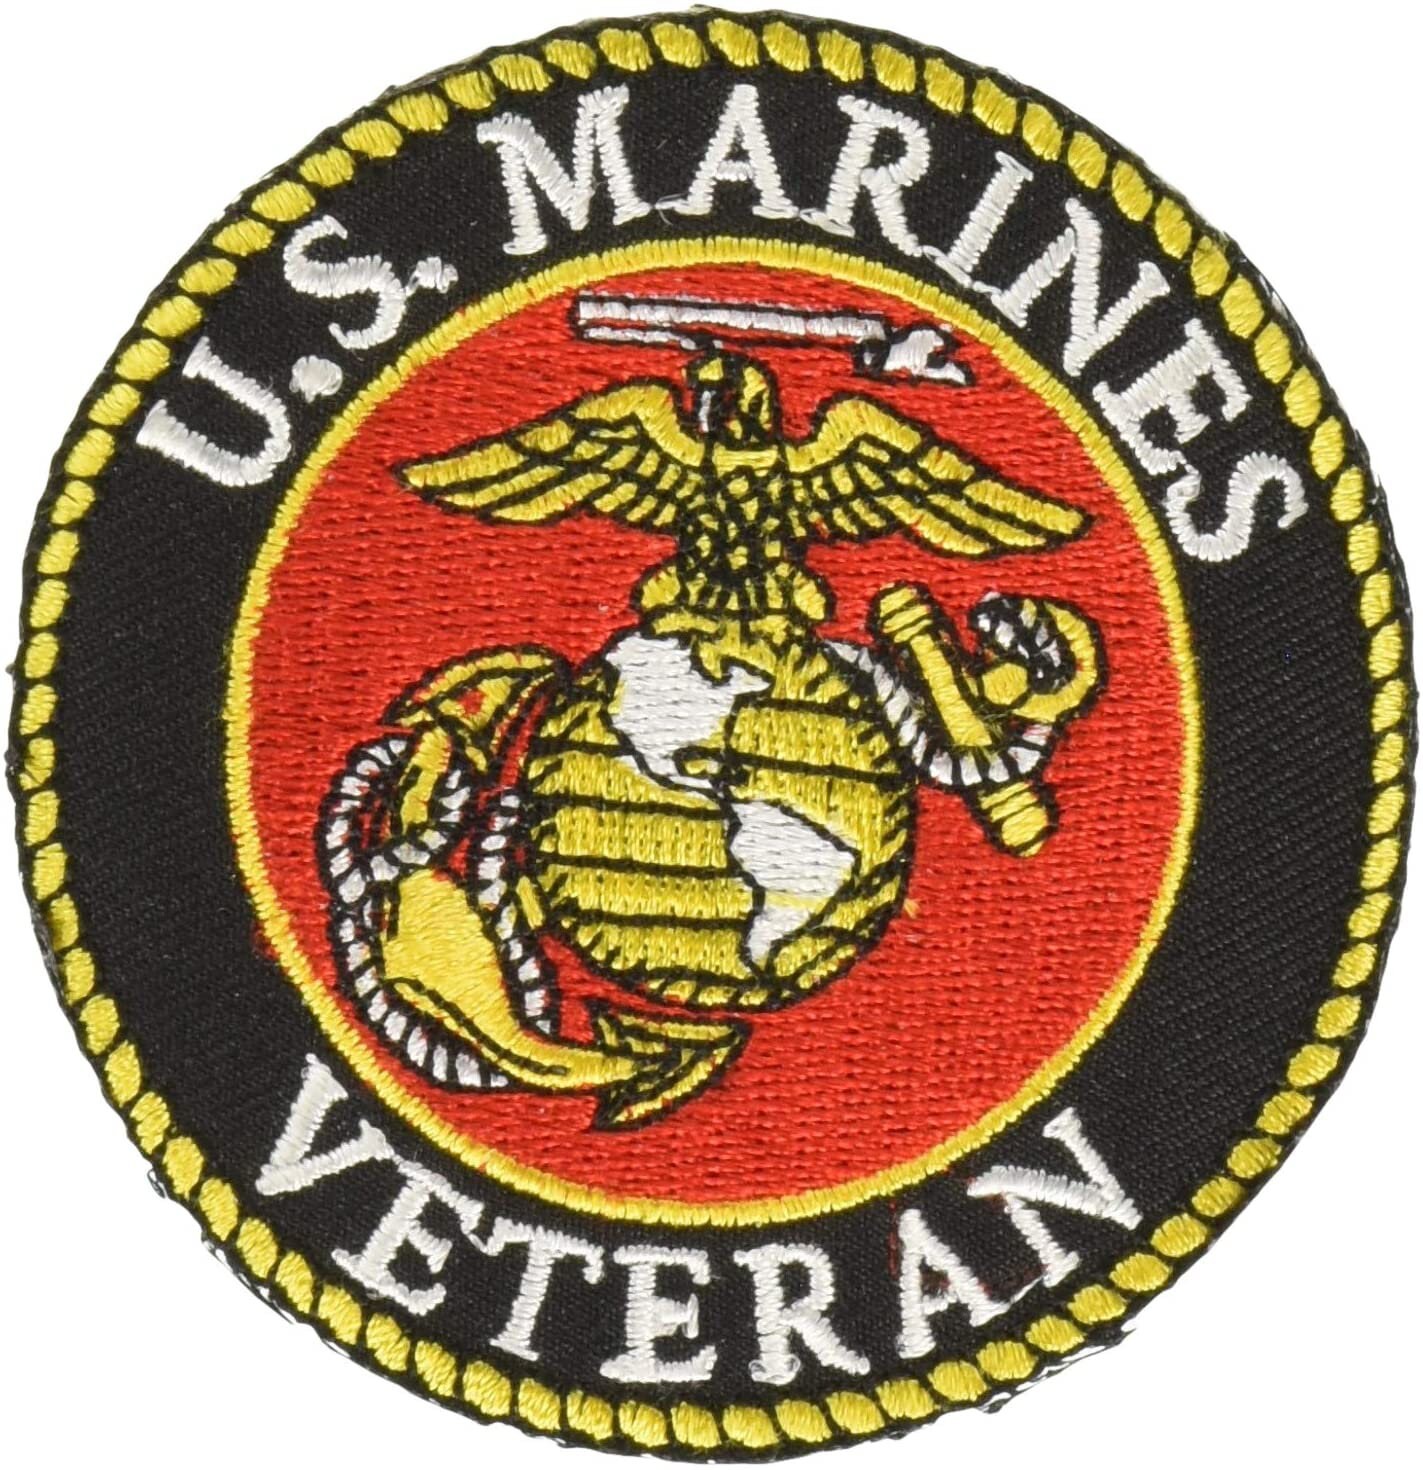 Marine Corps Patches With Iron on and Velcro Fastener Backing